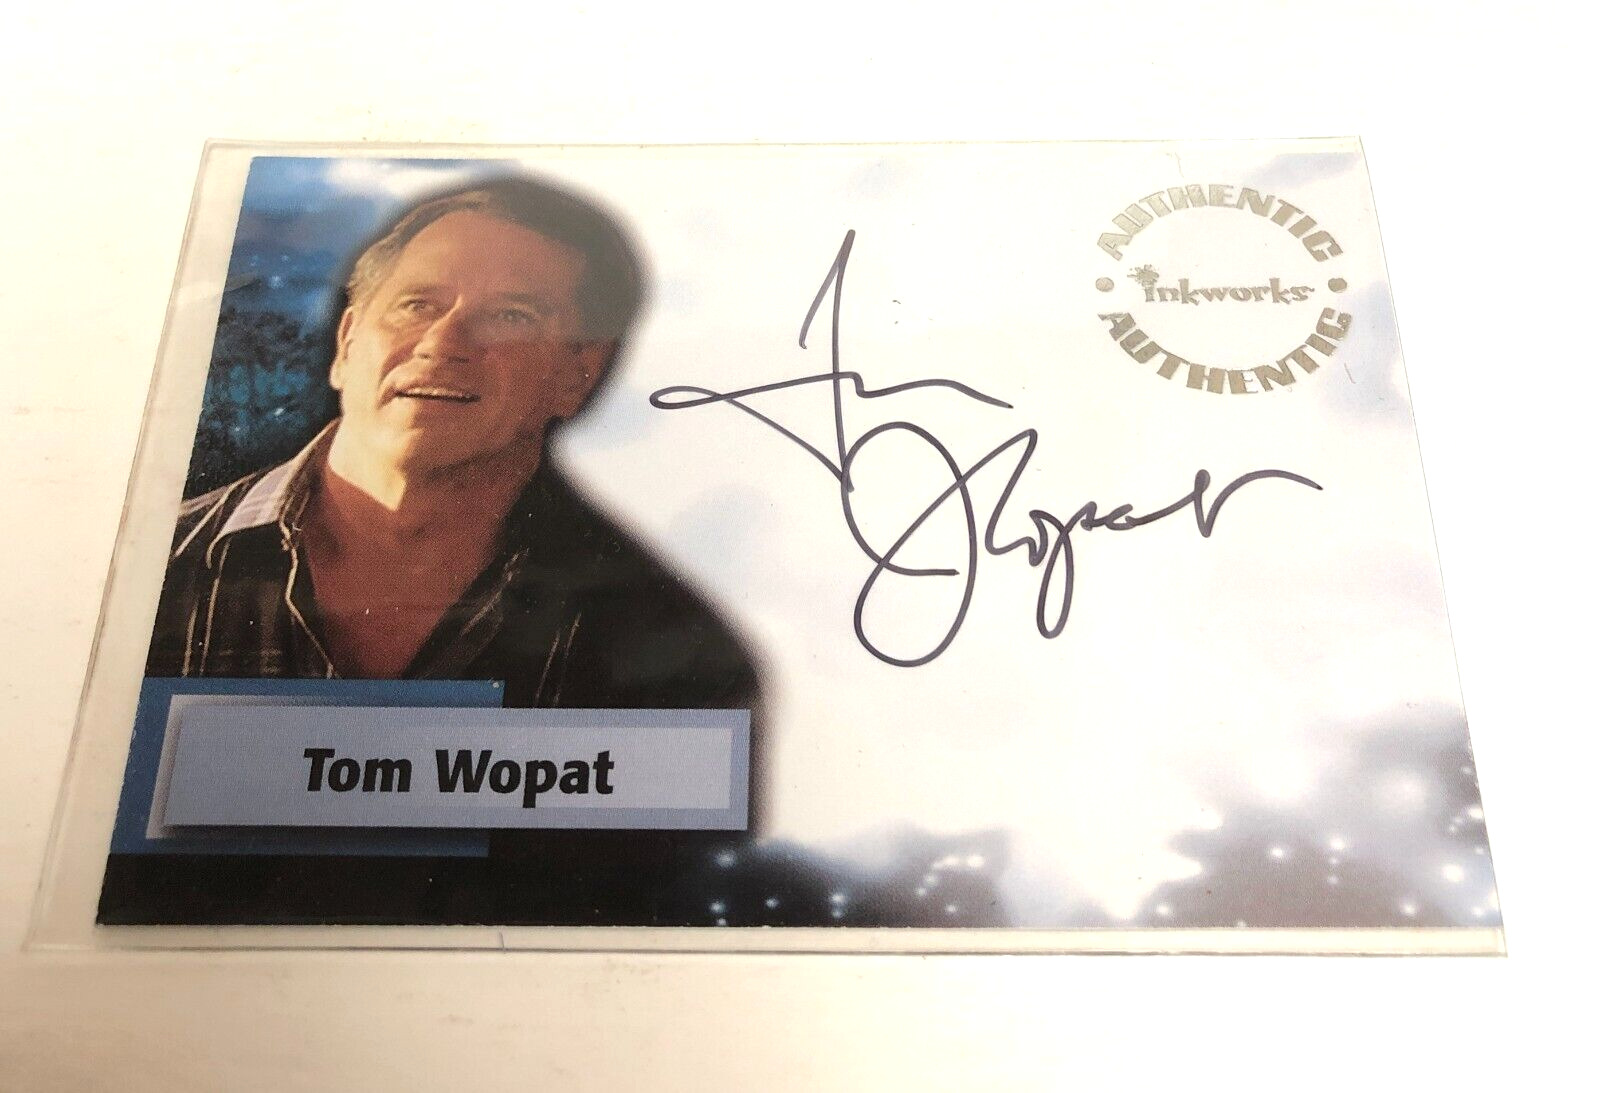 2006 Autographed Smallville Trading Card Signed by Tom Wopat  (Jack Jennings)